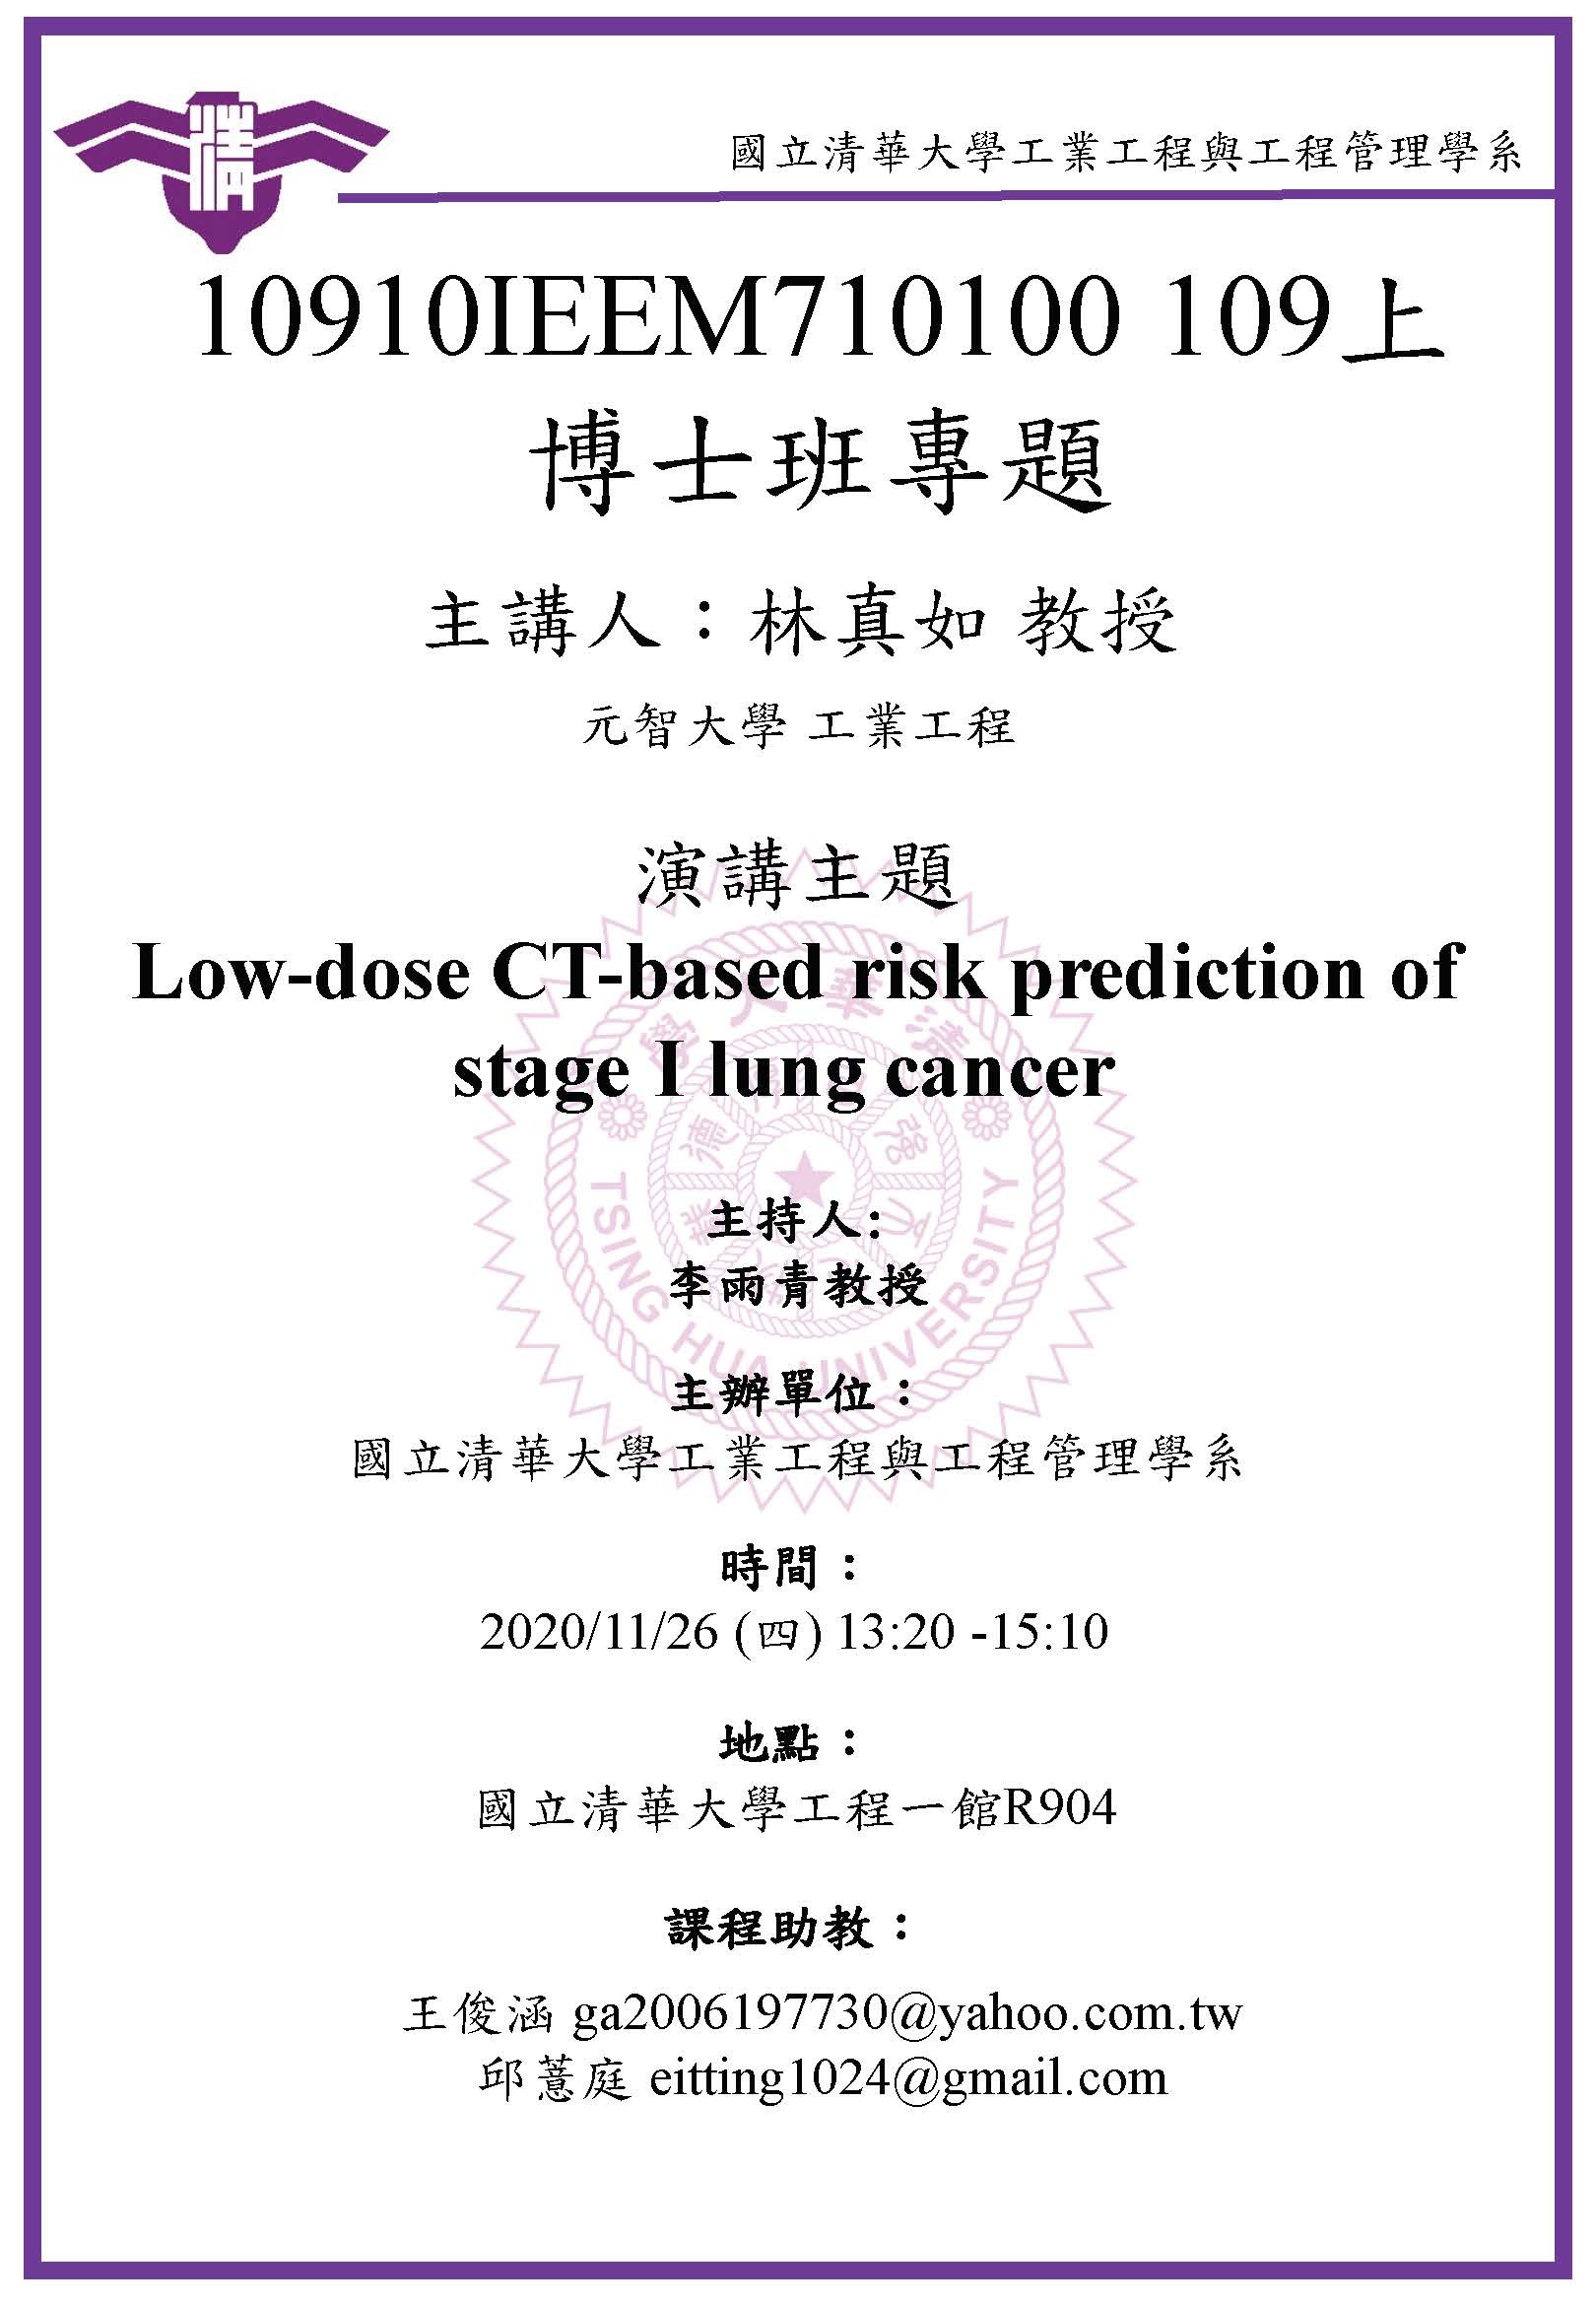 Low-dose CT-based risk prediction of stage I lung cancer